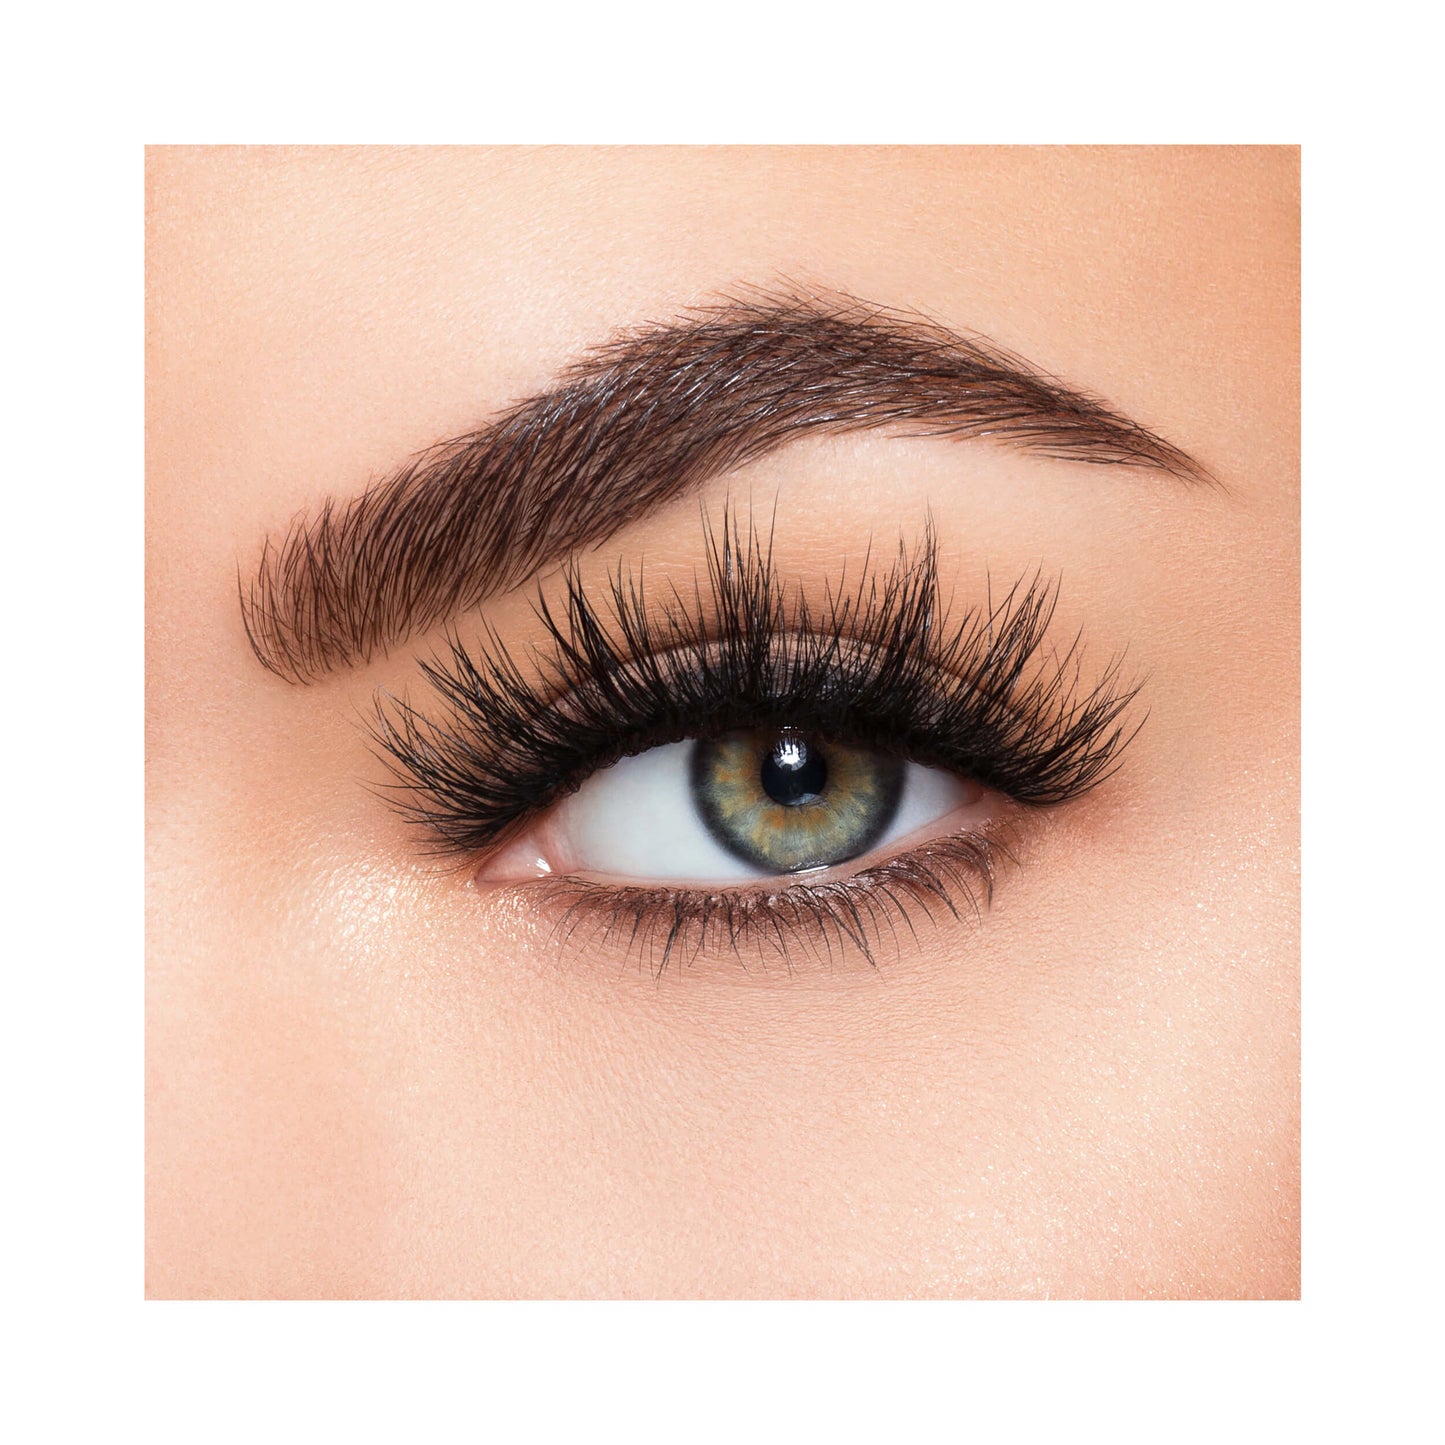 Lilly Lashes "So Extra" 3D Mink Lashes